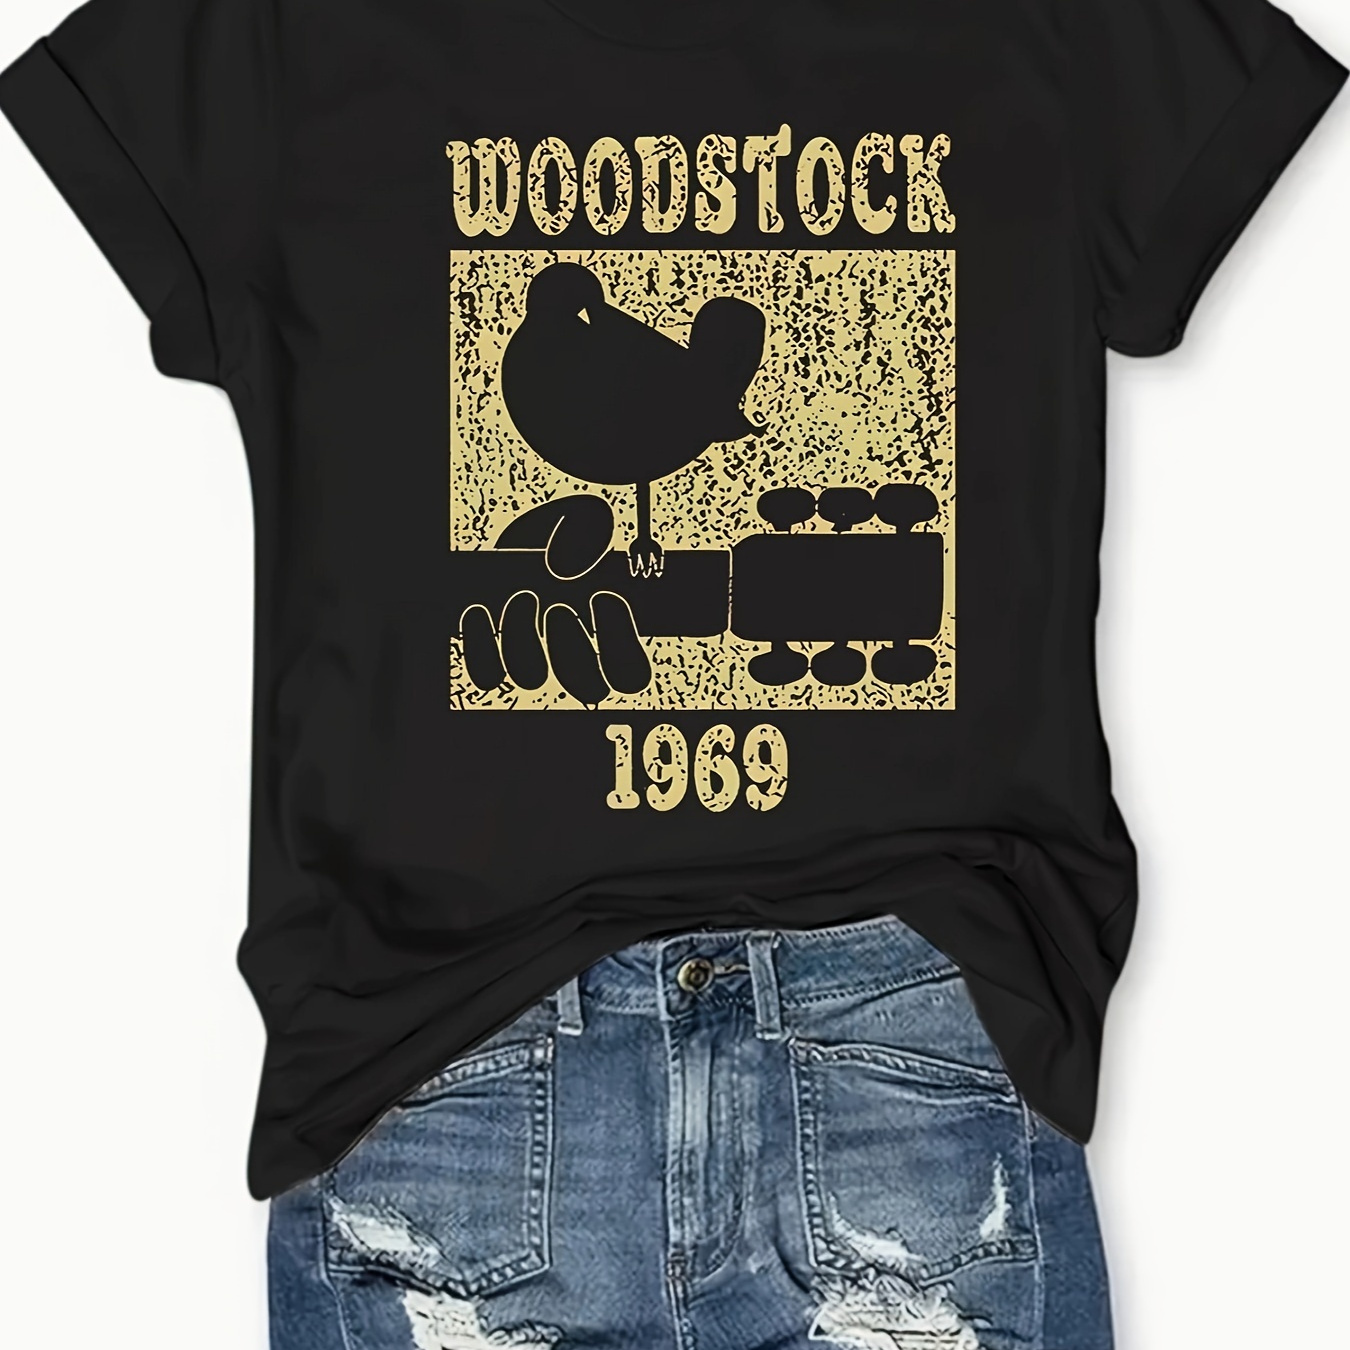 

1969 Print Crew Neck T-shirt, Casual Short Sleeve Top For Spring & Summer, Women's Clothing